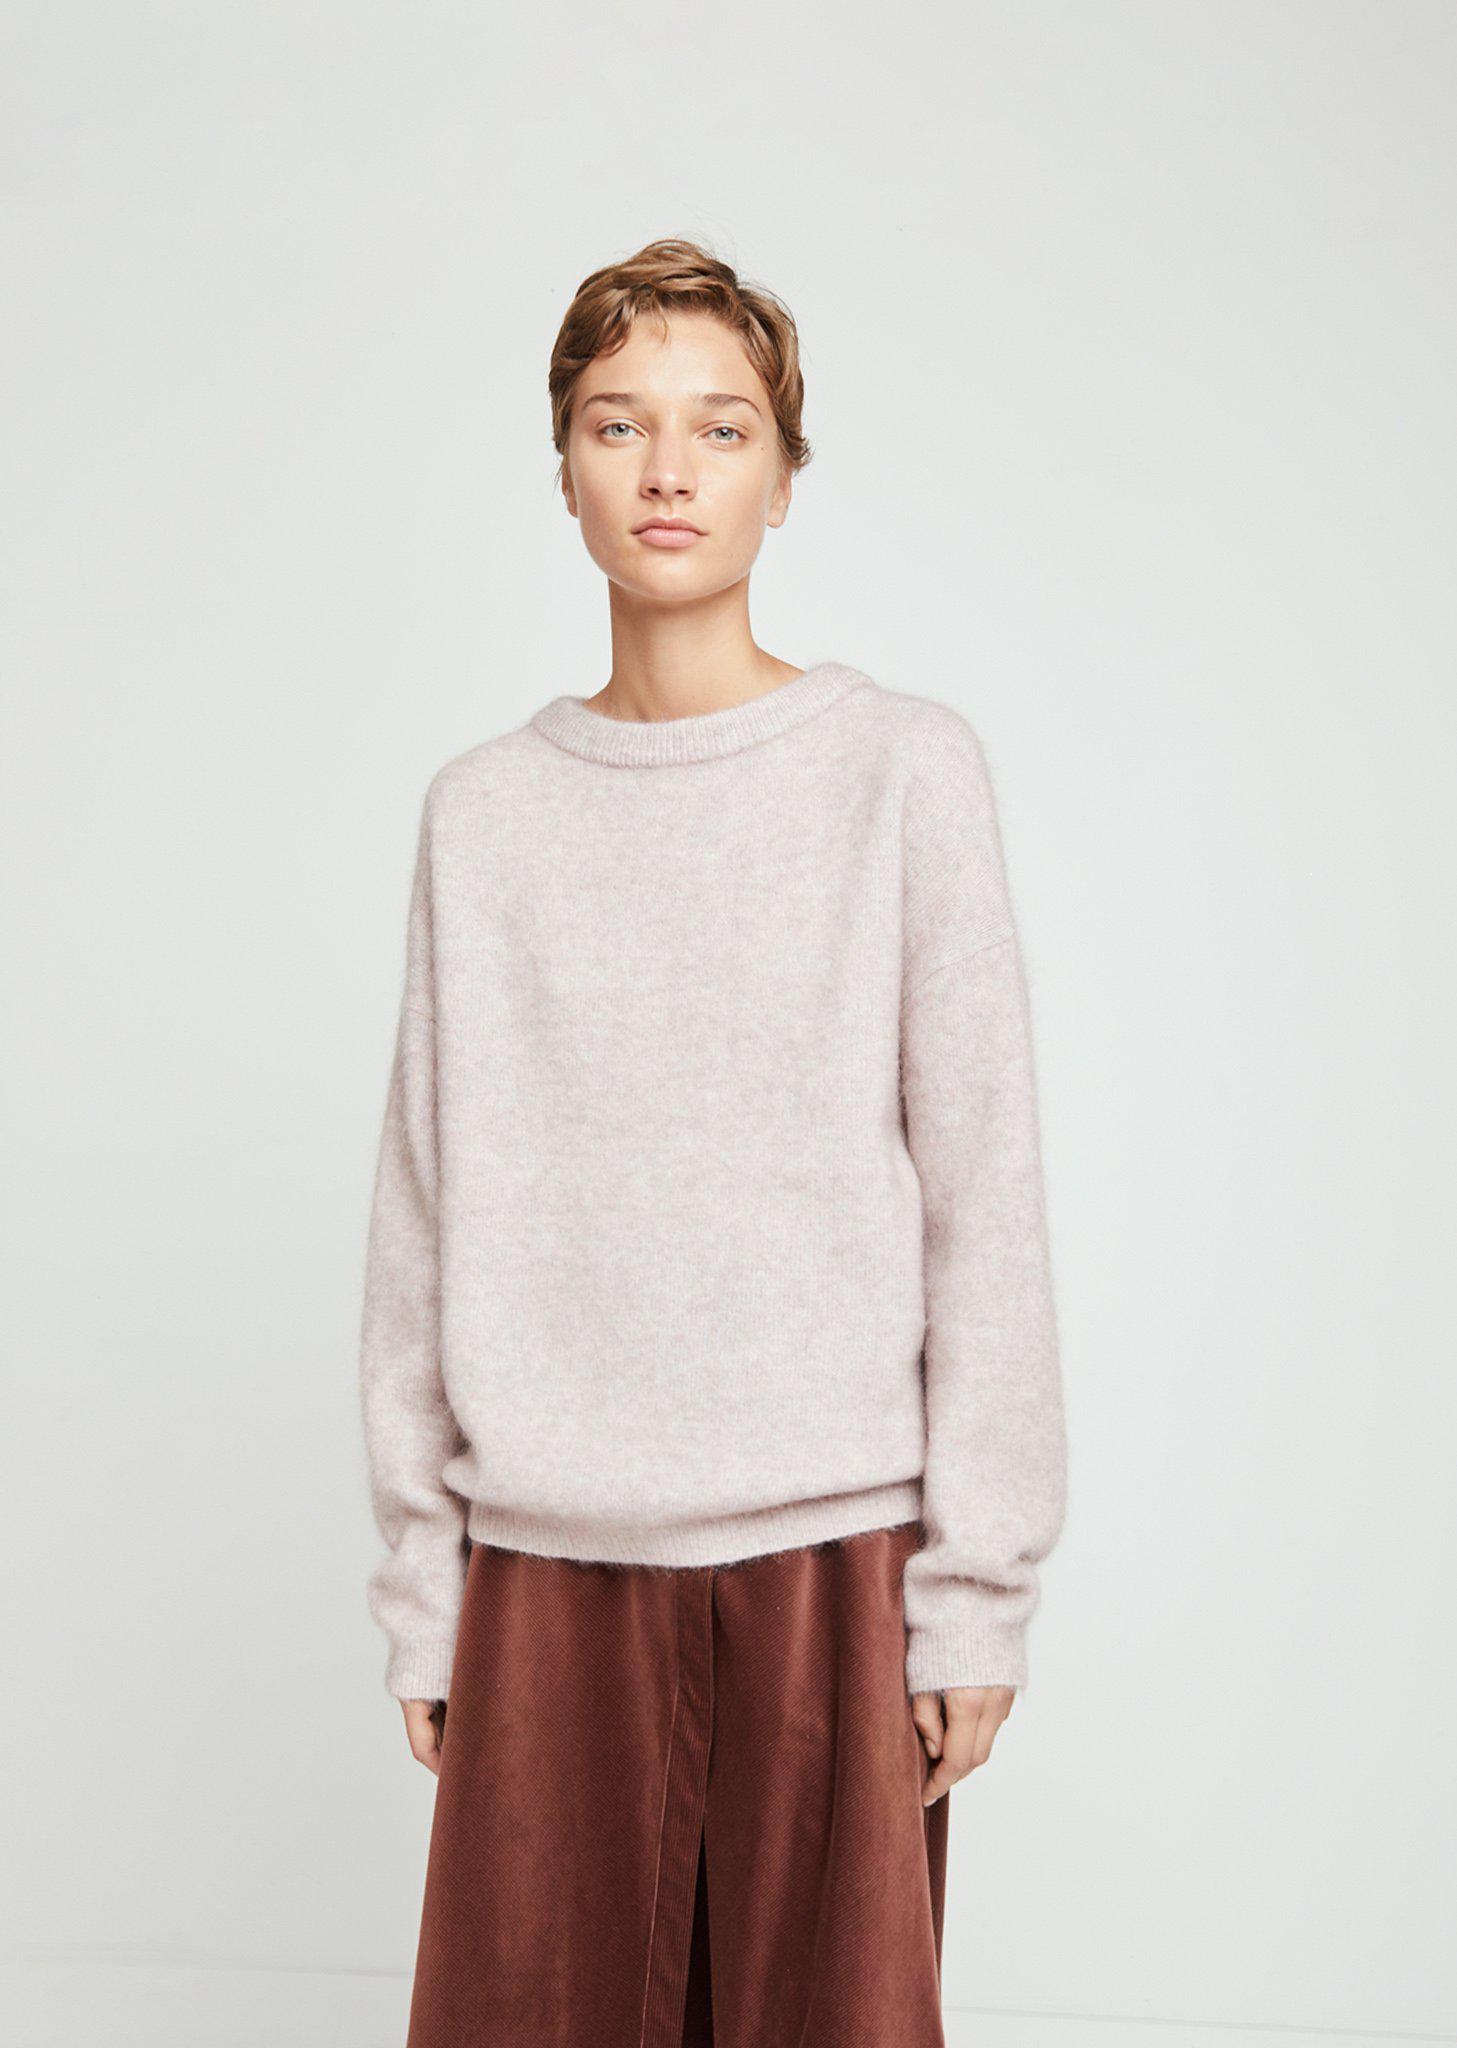 Acne Studios Dramatic Mohair Sweater in Pink | Lyst Canada